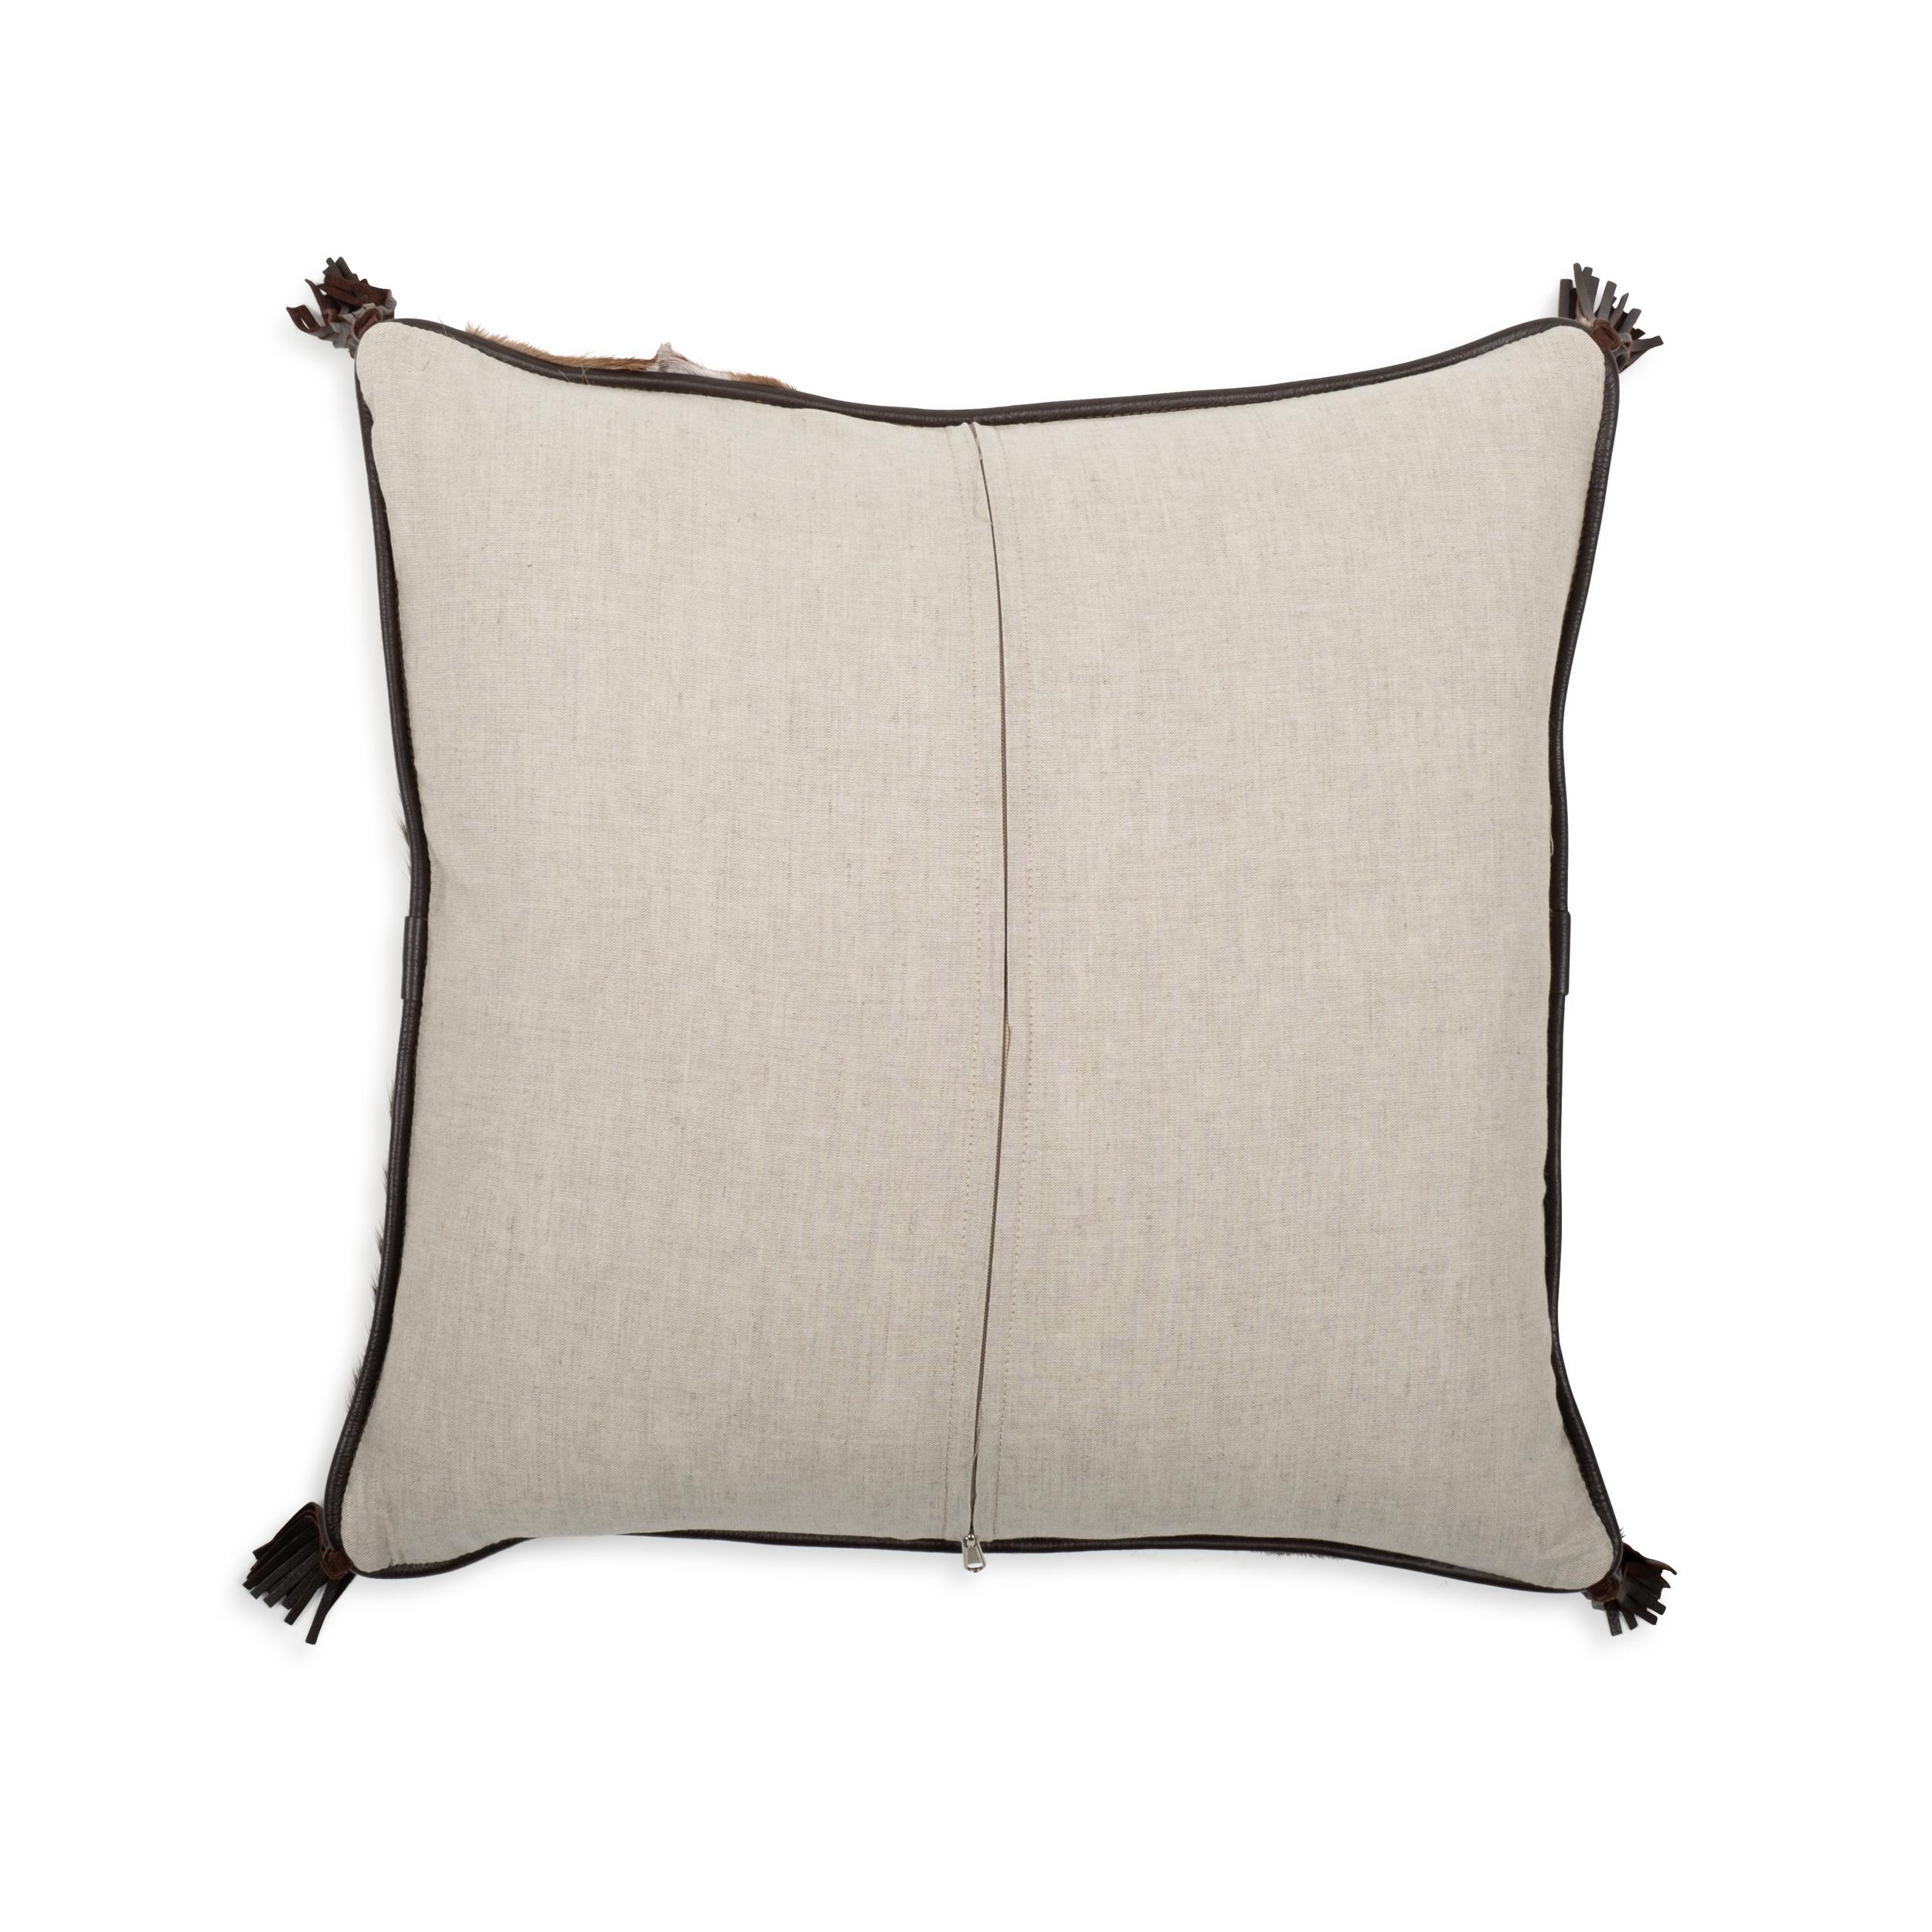 Springbok Hide Duo Pillow with Leather Trims